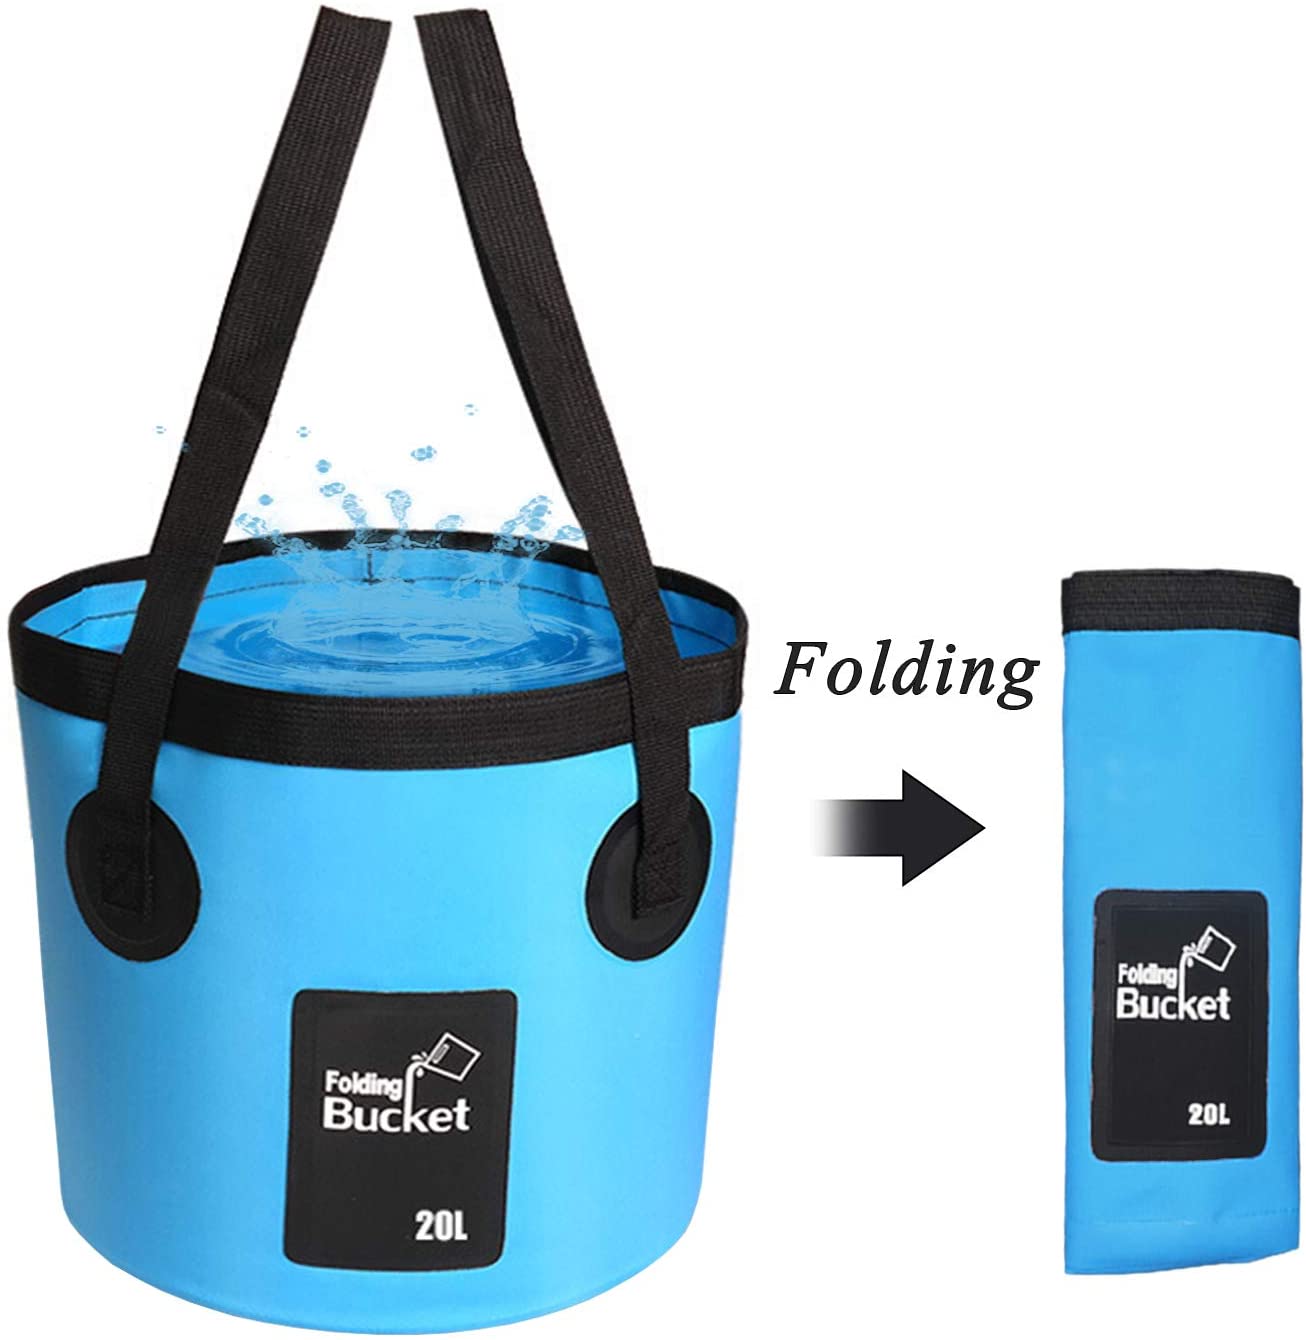 Collapsible Bucket Foldable Waterproof Fishing Bucket Fishing Water Pail Collapsible Plastic Bucket with Lid for Hiking Camping Outdoor 5l 